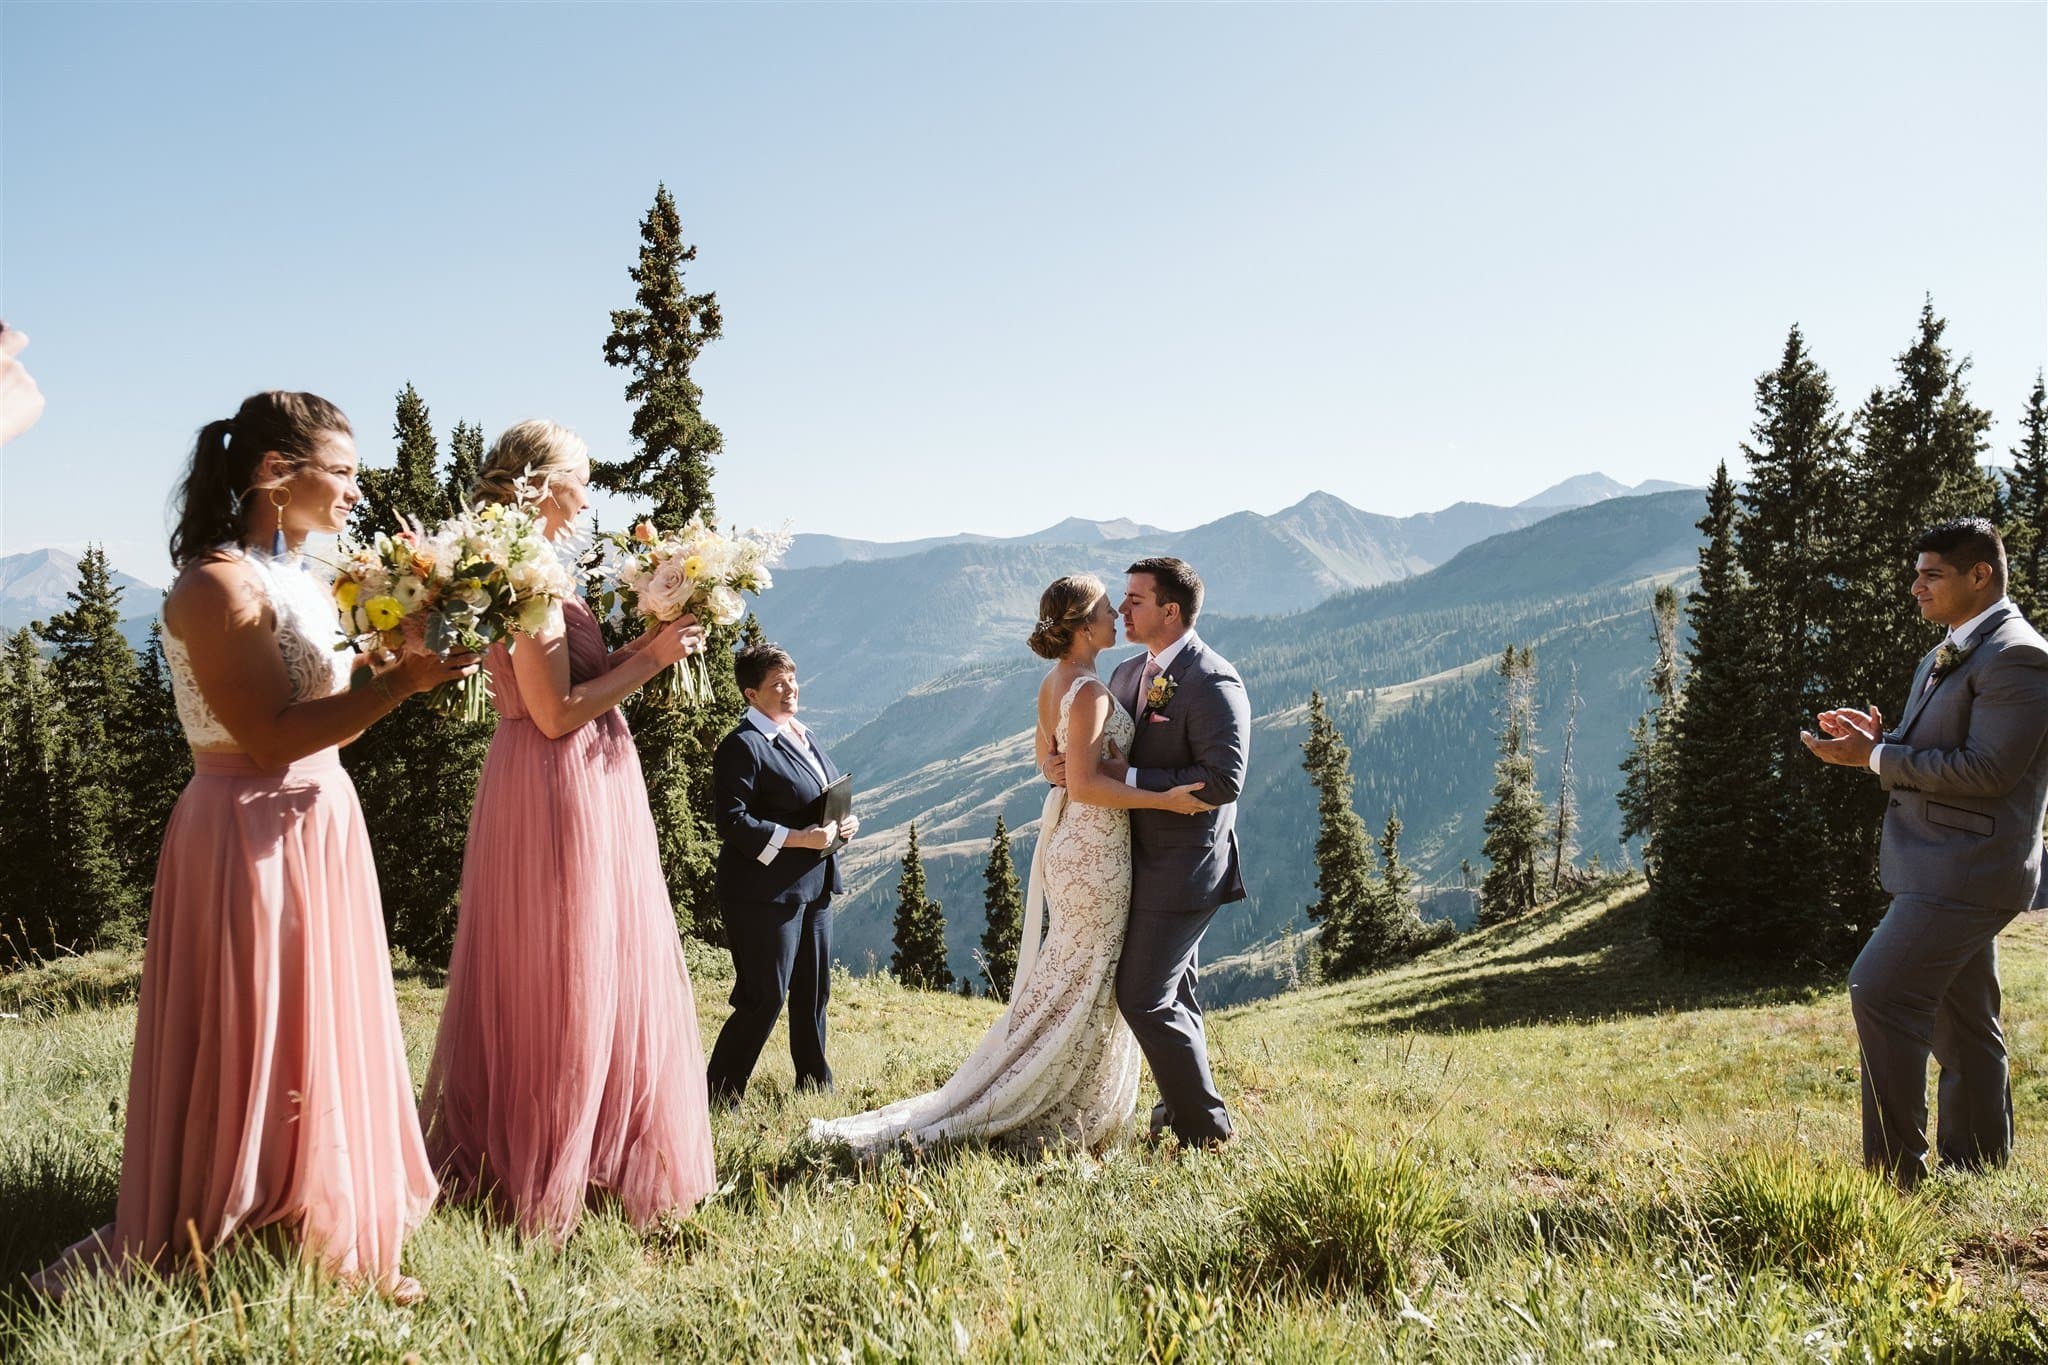 Elopement ceremony in Crested Butte